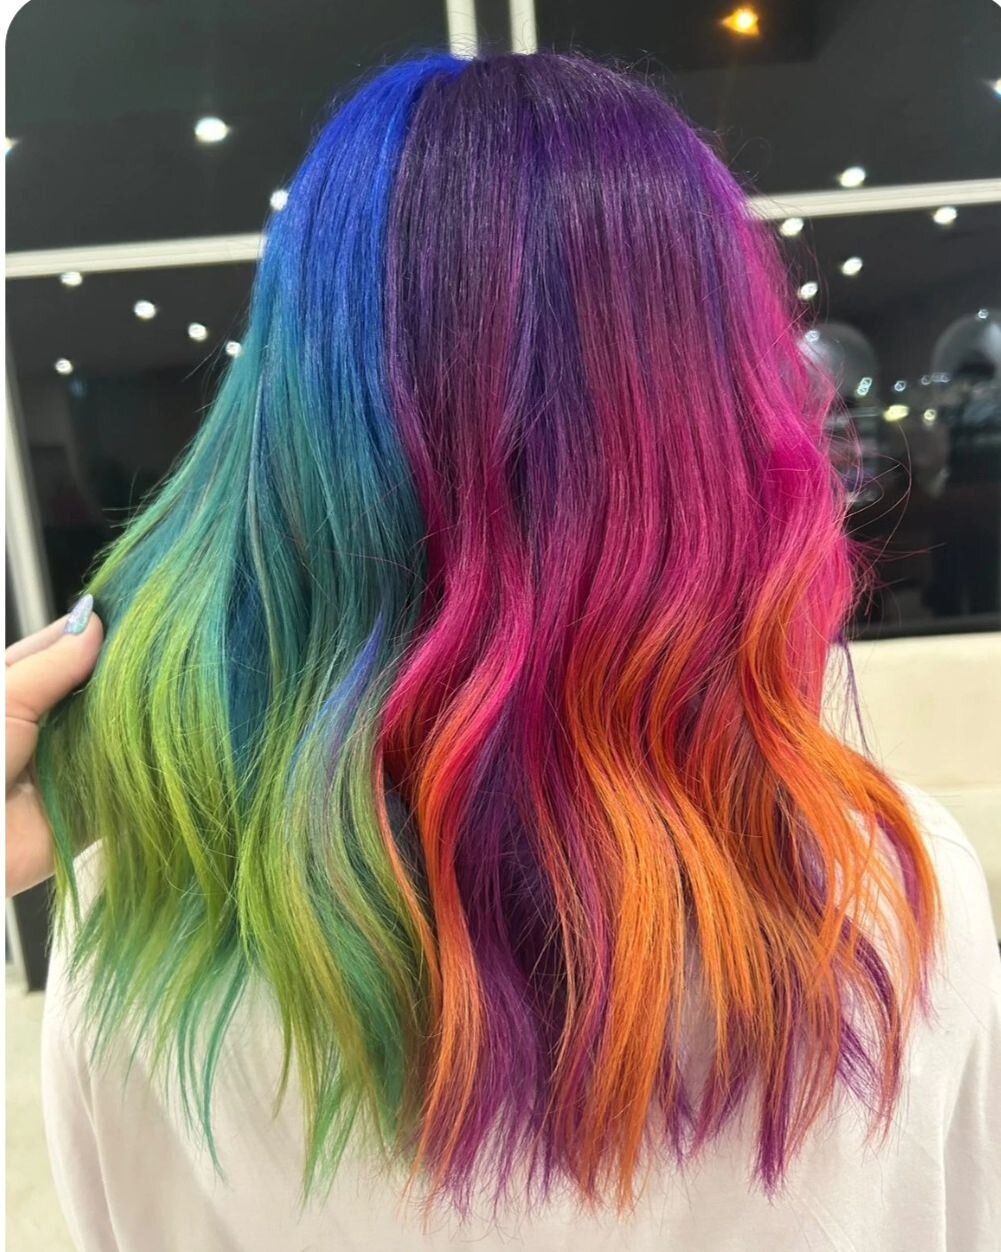 When you can't pick a colour..... so you have them all !!!
Waves or straight??? What's your fave?
Thats what you call a creative colourist !
.
.
.
#HairEtiquetteSalon #hairart #creative #creativecolour #rainbow #rainbowhair #allcolours #colourpalette